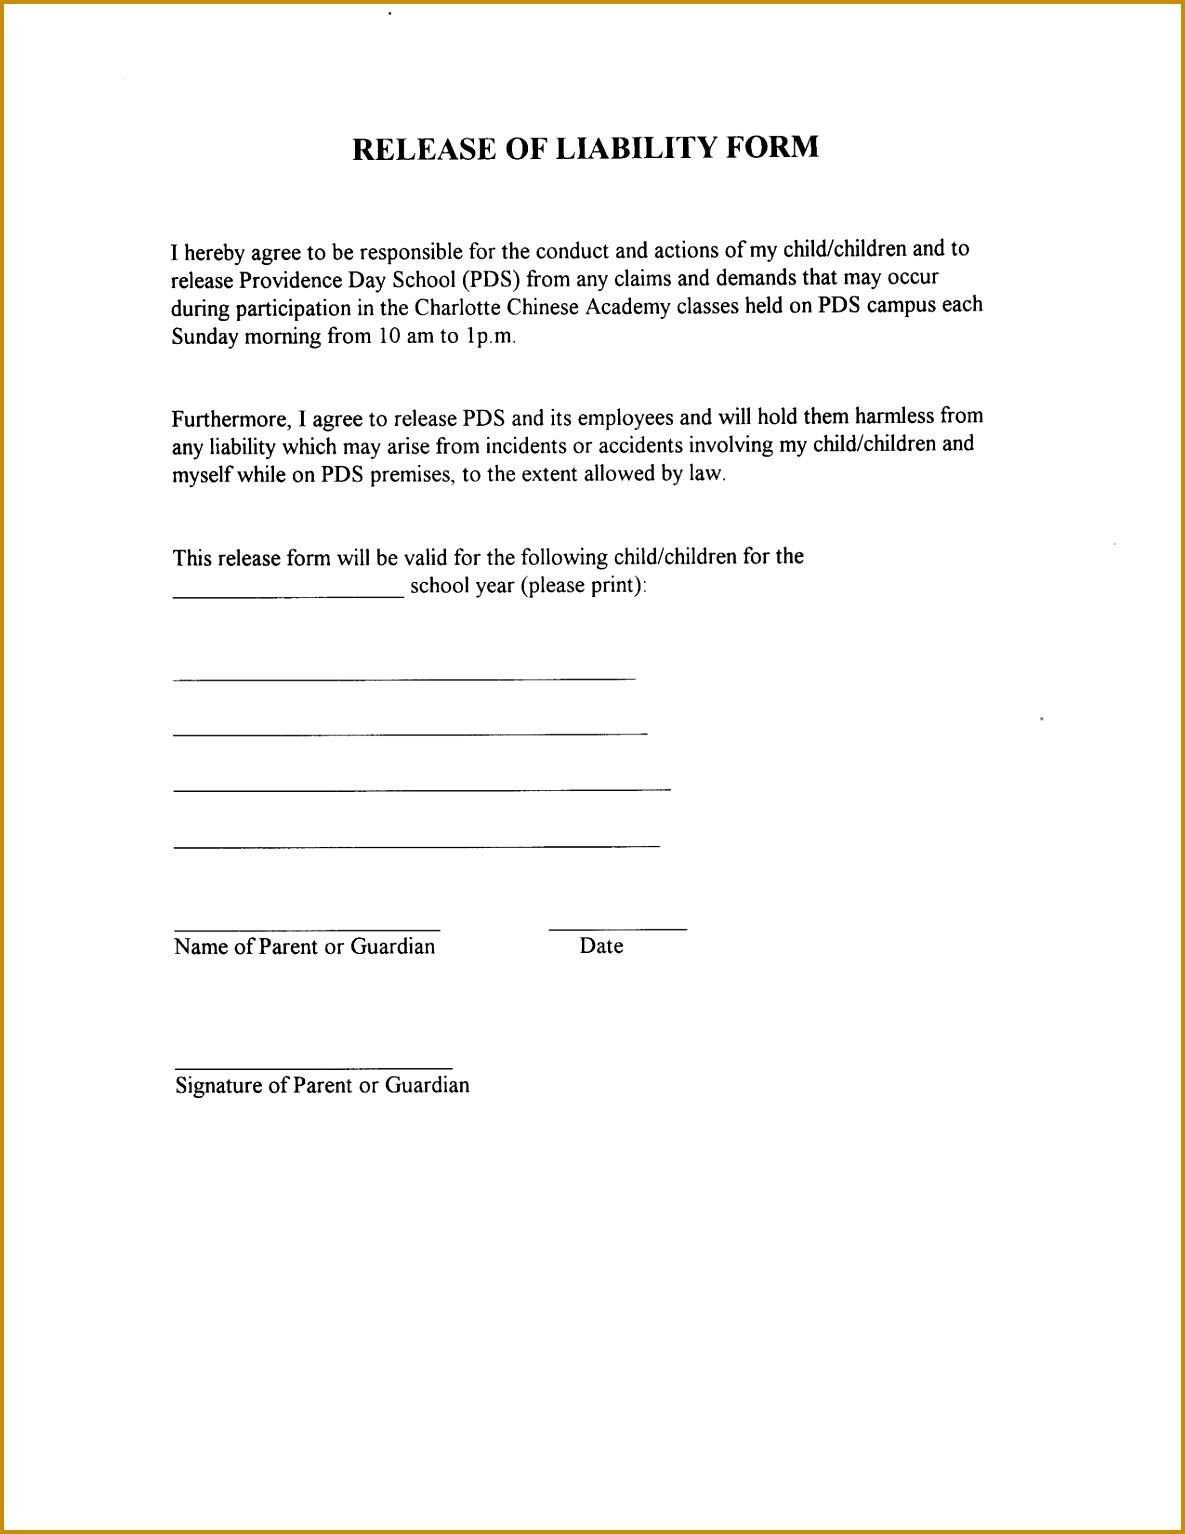 Liability Release Form Template in images release of liability sample 15341185